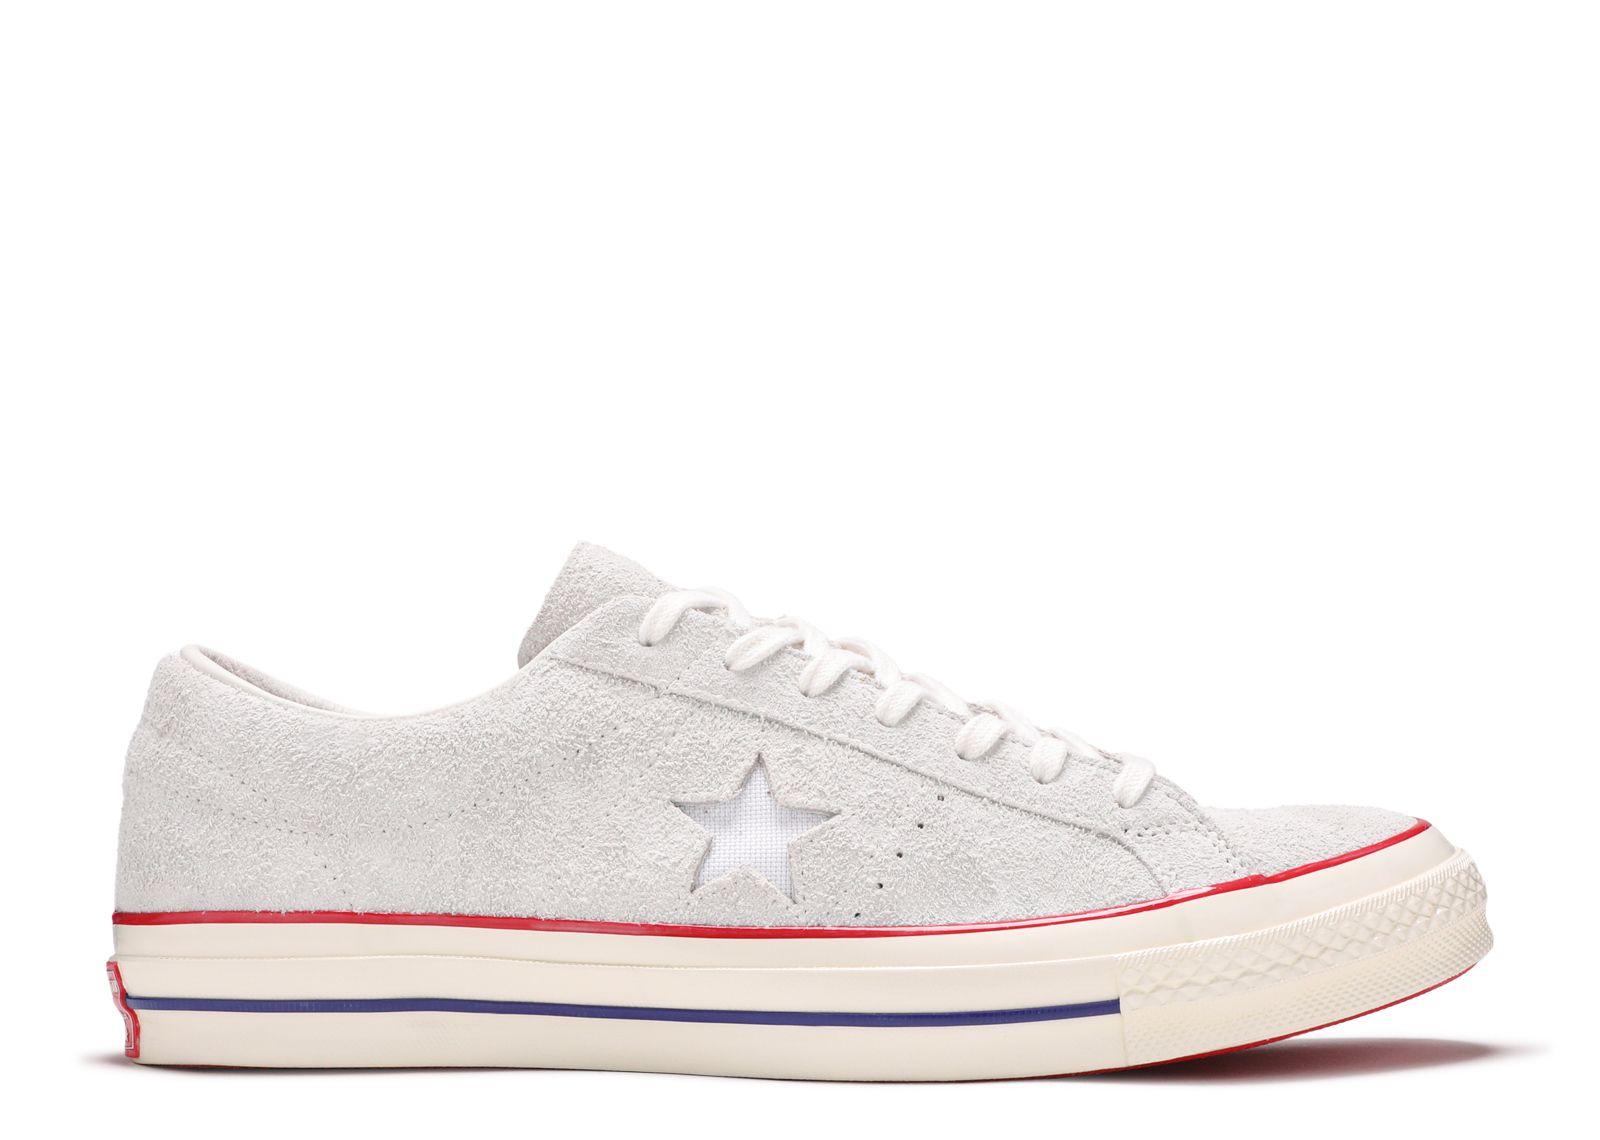 Кроссовки Converse Undefeated X One Star Suede Low 'White', белый кеды converse x come tees one star low серый размер 38 eu